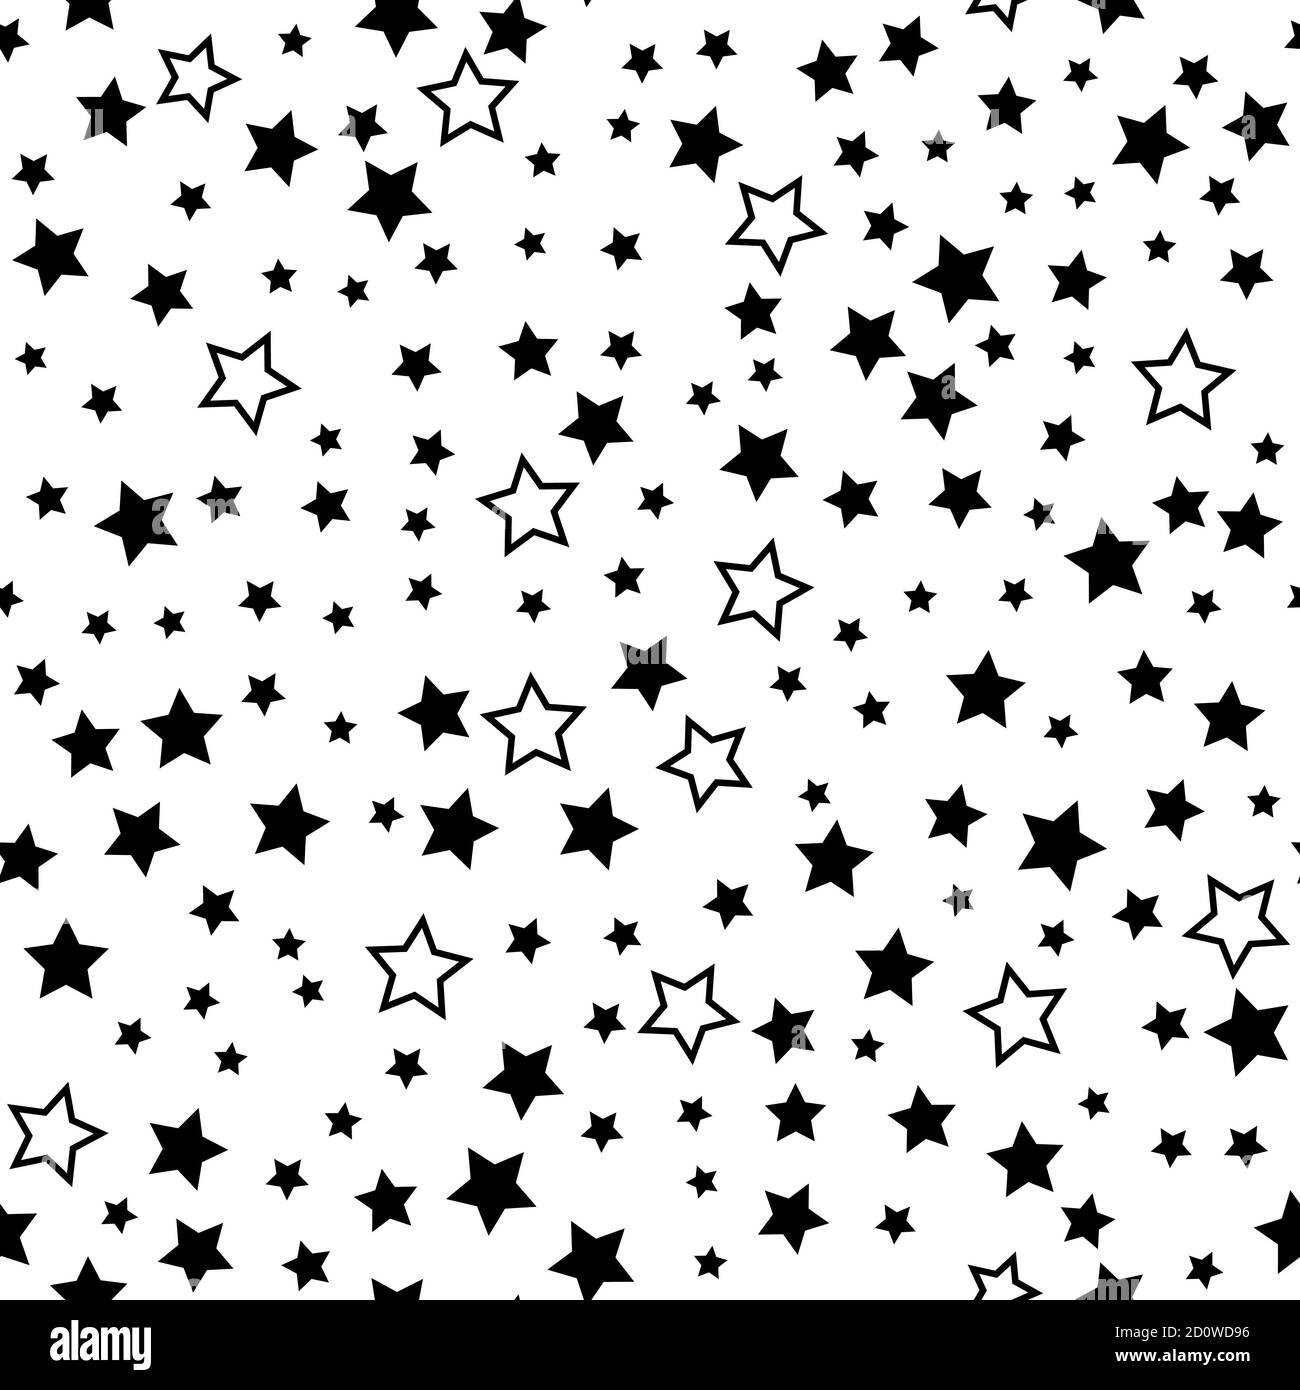 https://c8.alamy.com/comp/2D0WD96/star-seamless-pattern-black-stars-on-white-retro-background-chaotic-elements-abstract-geometric-shape-texture-seamless-pattern-for-web-print-2D0WD96.jpg